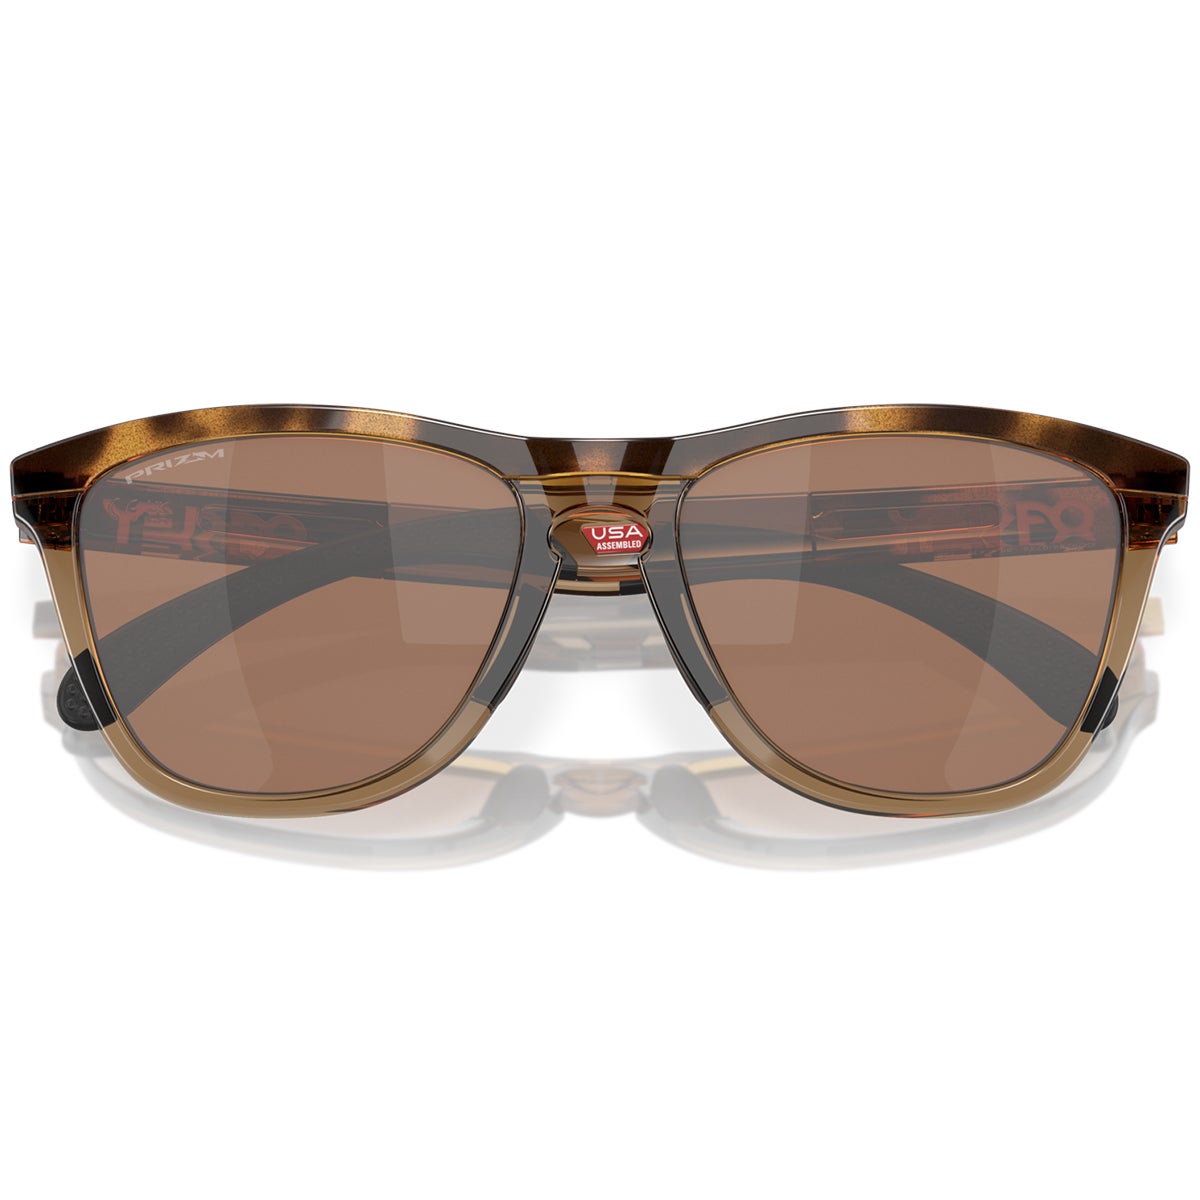 Oakley Frogskins Prizm Polarized Sunglasses in Brown Tort/Brown 